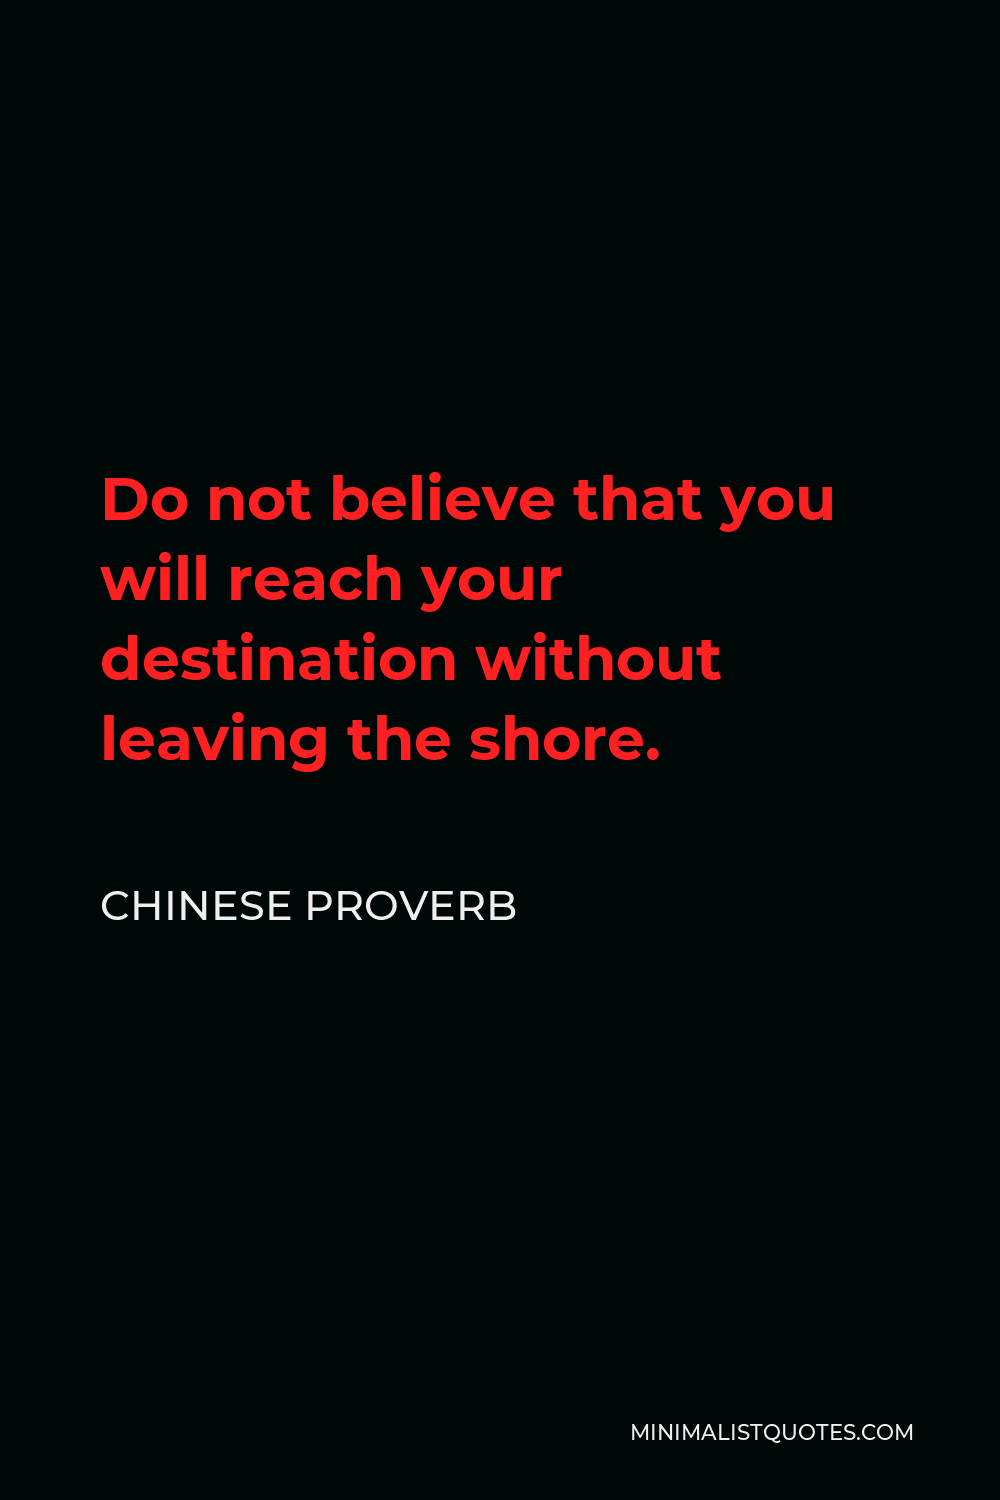 Chinese Proverb Quote - Do not believe that you will reach your destination without leaving the shore.